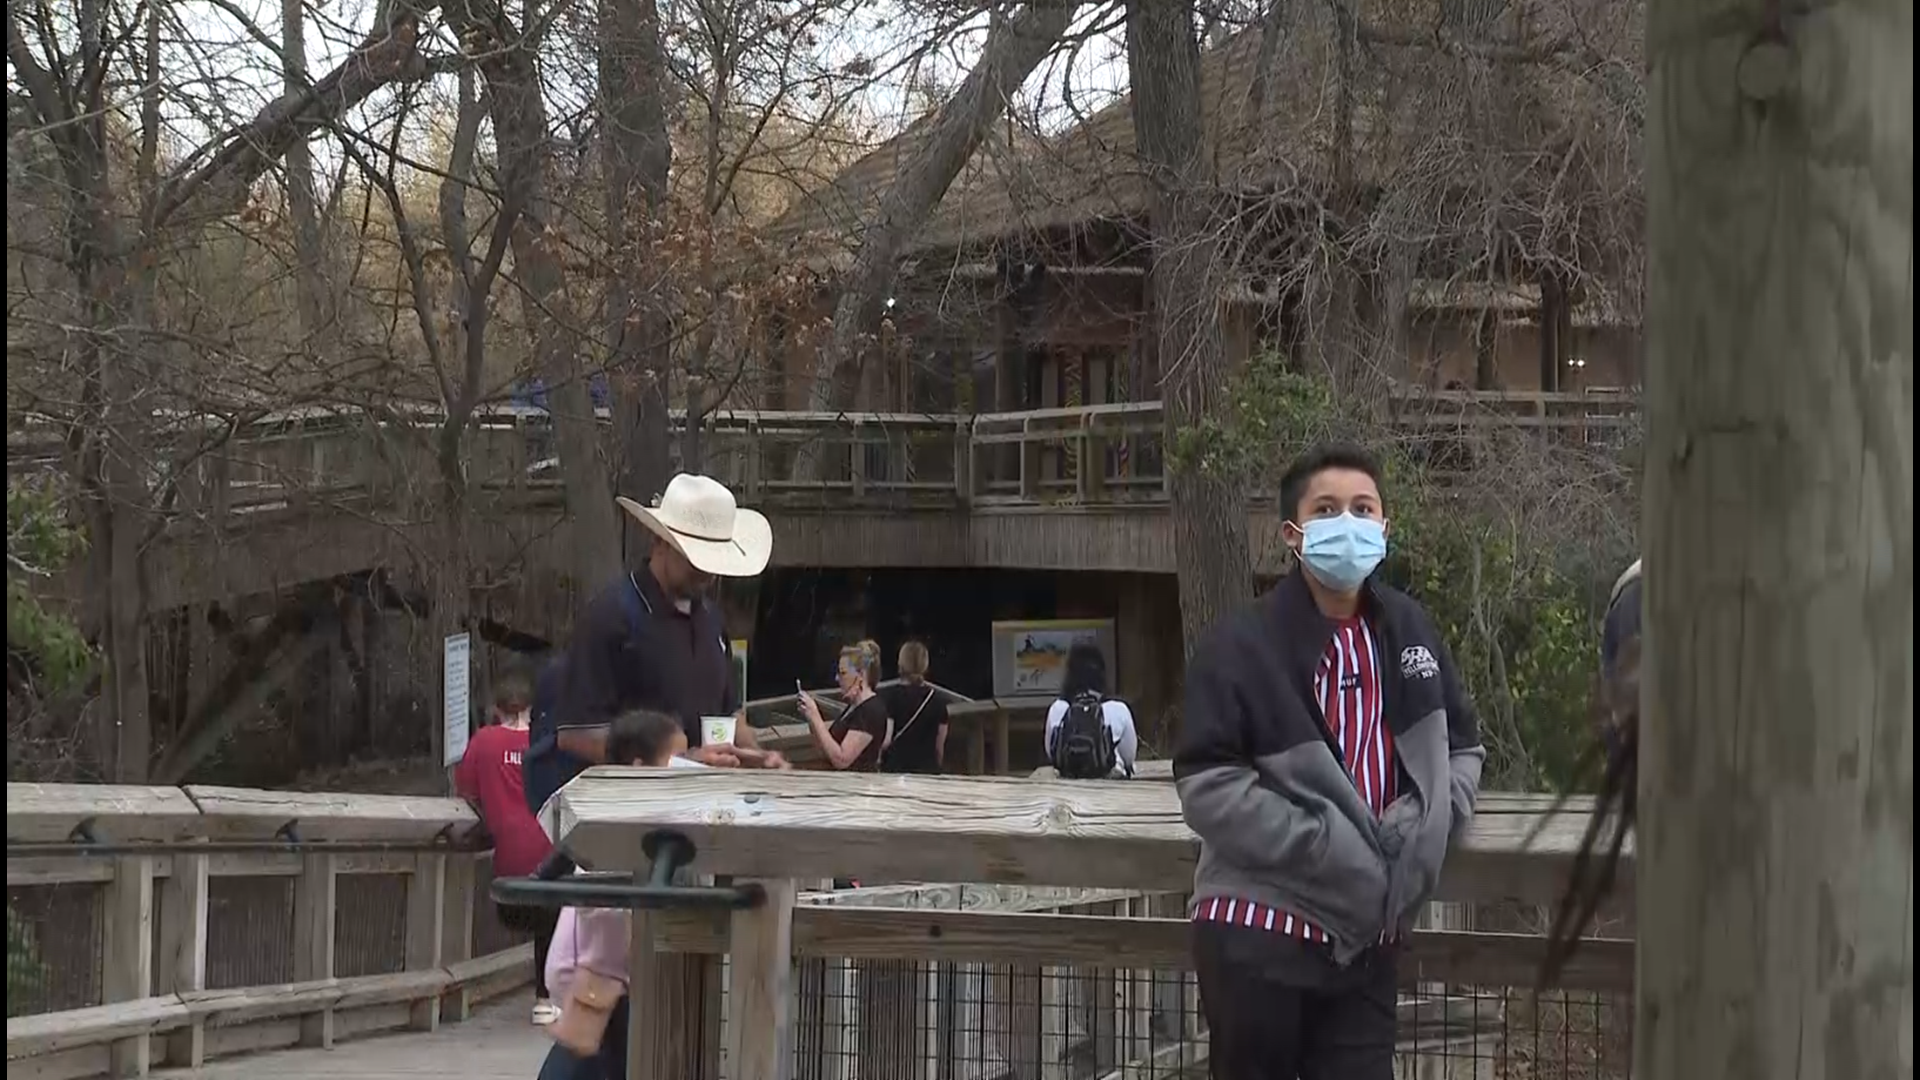 As Spring Break arrives and the statewide mask mandate expires, local attractions in Waco will have to choose whether or not to require masks